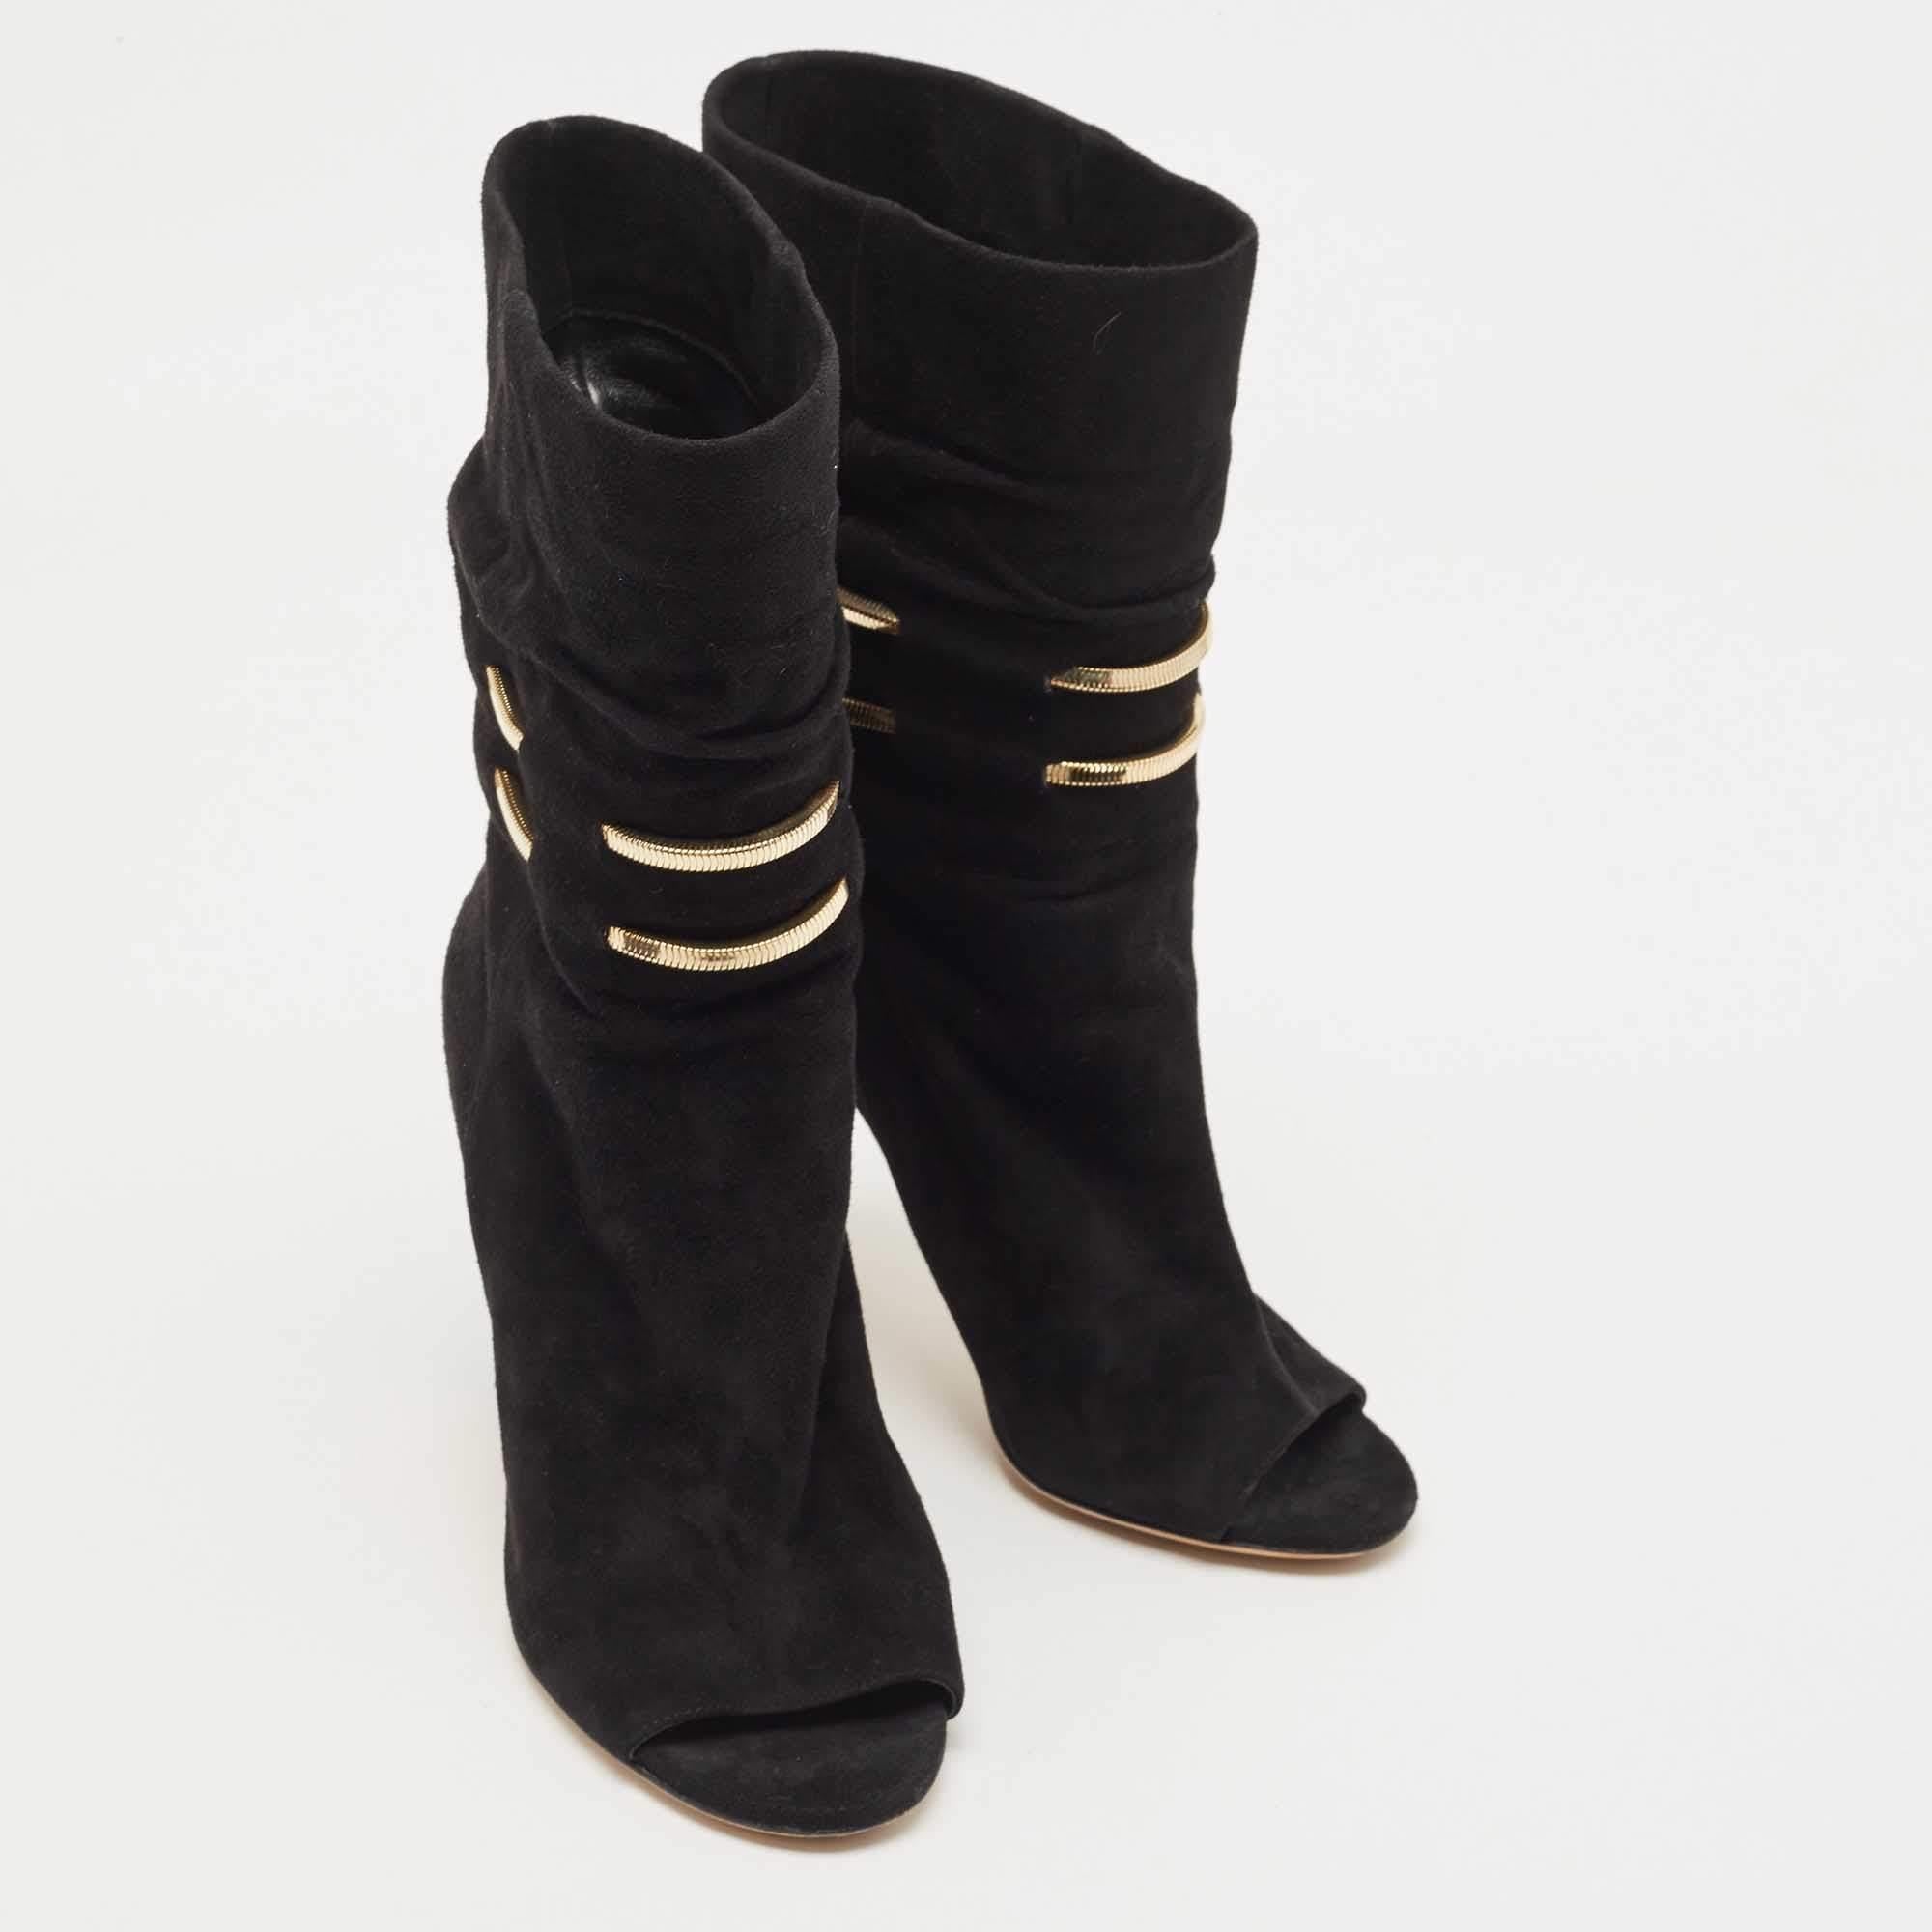 Jimmy Choo Black Suede Ankle Boots Size 36.5 1